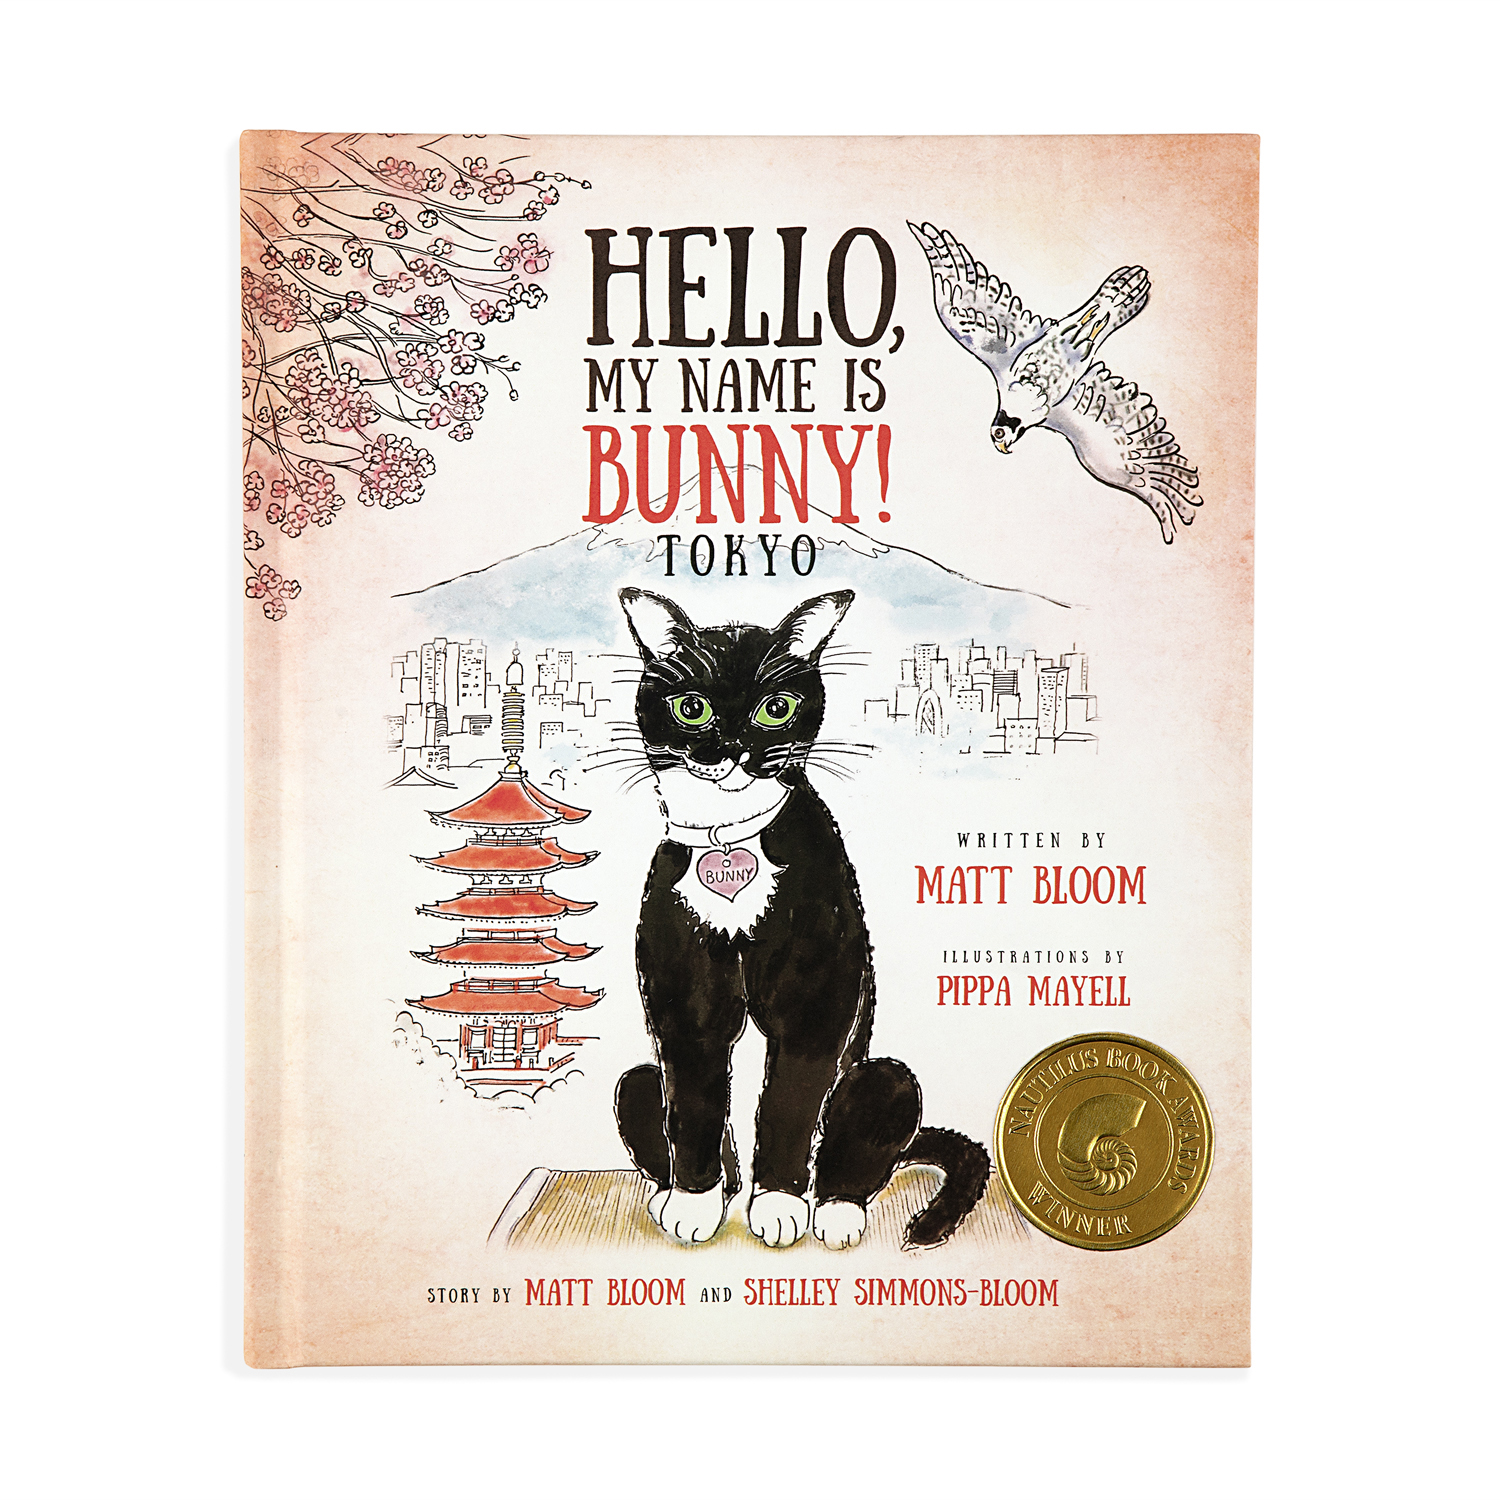 A book about Bunny the cat's adventure in Tokyo